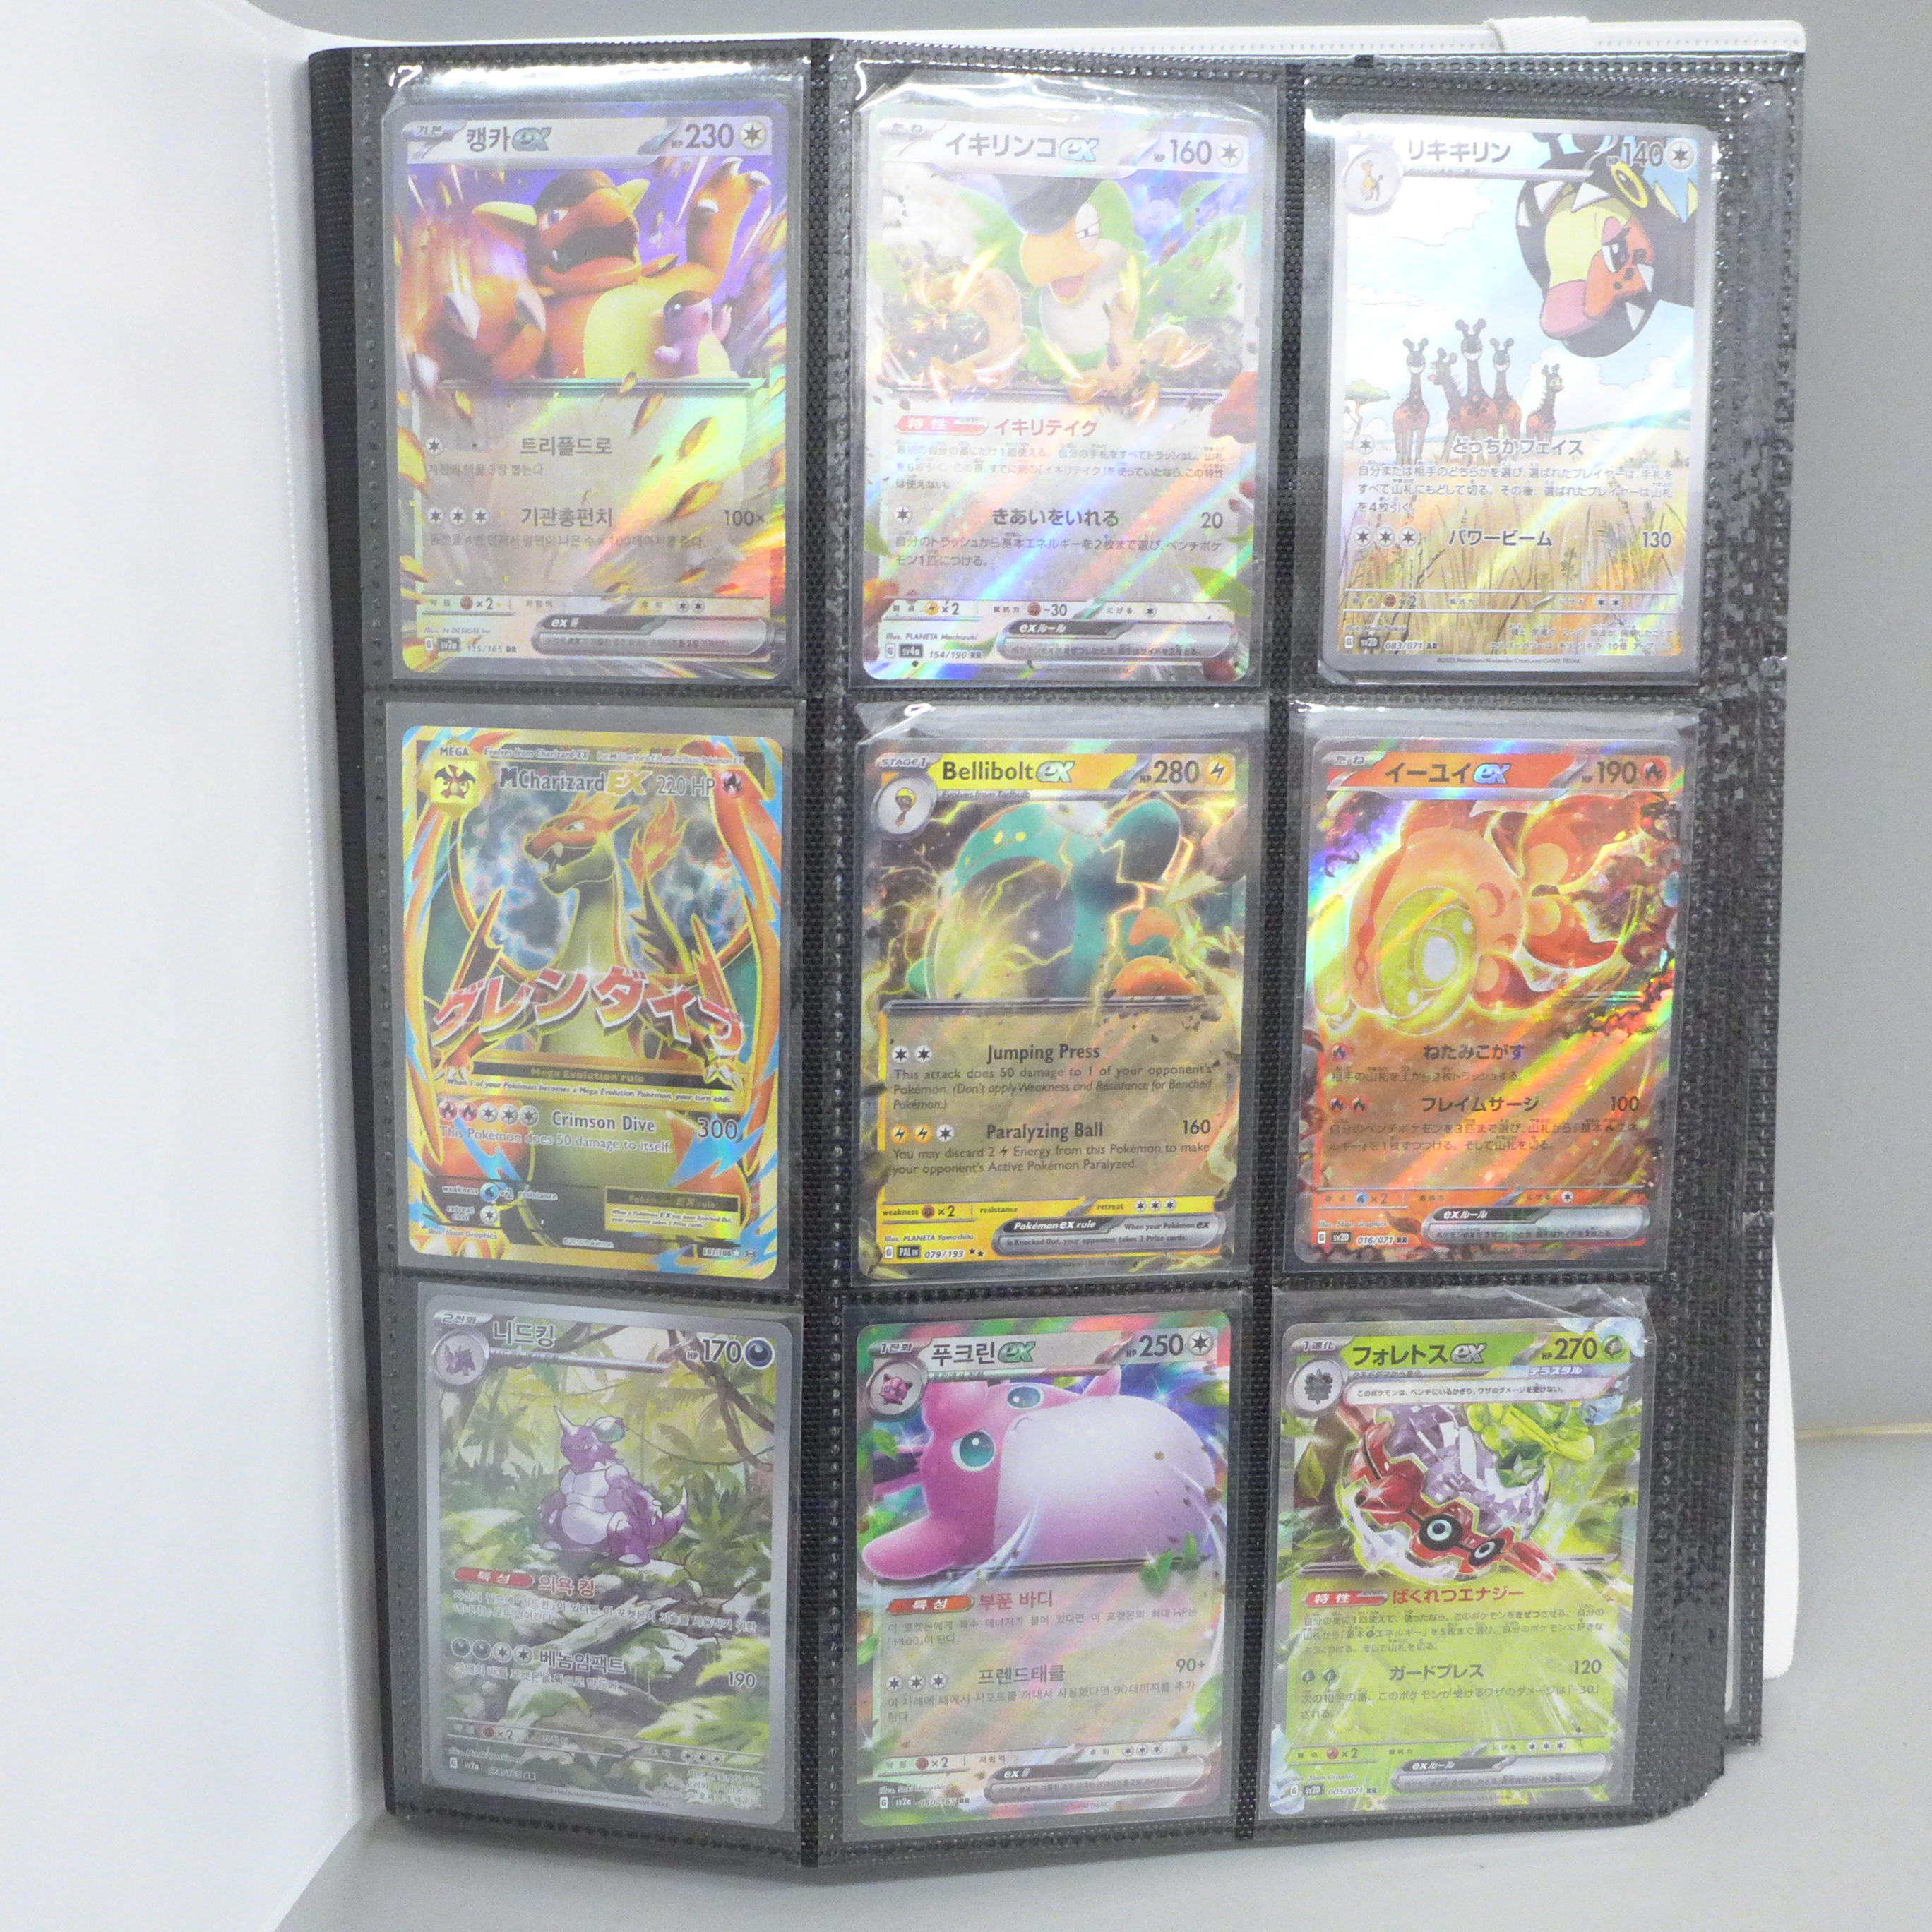 An album of approximately 270 Pokemon cards